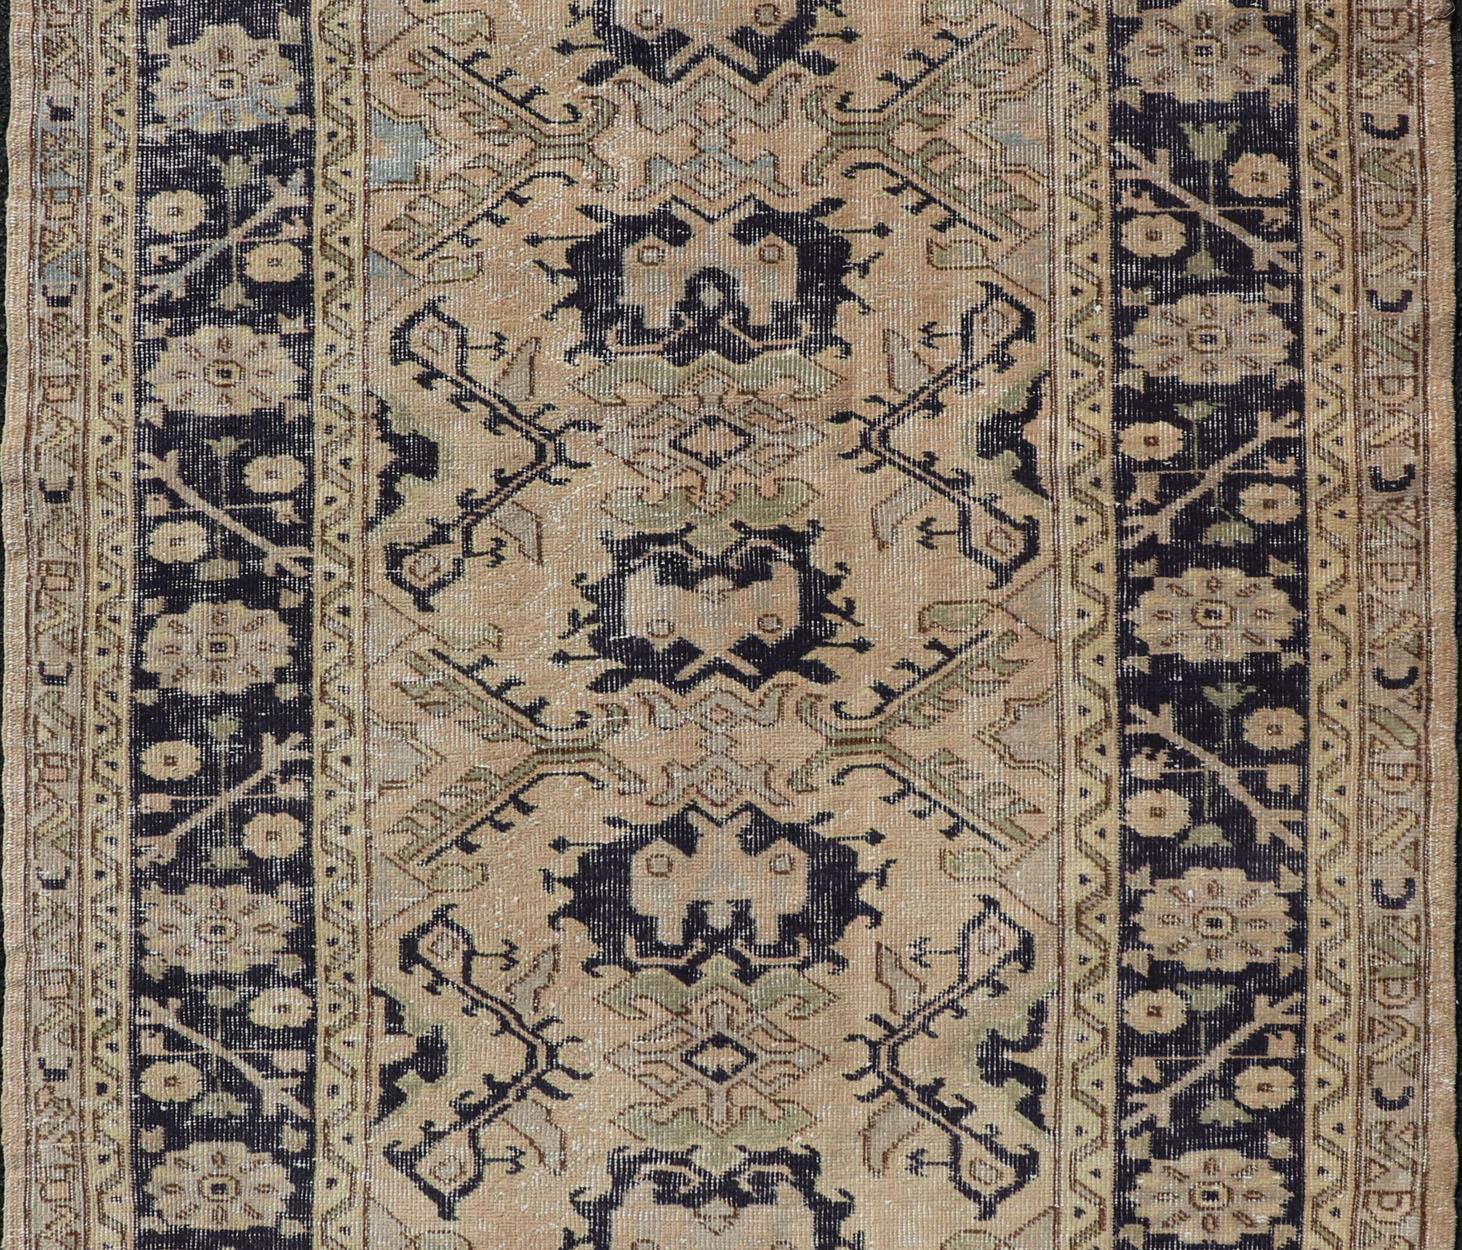 Vintage Turkish Oushak Rug with All-Over Sub-Geometric Medallion Design in Blue In Good Condition For Sale In Atlanta, GA